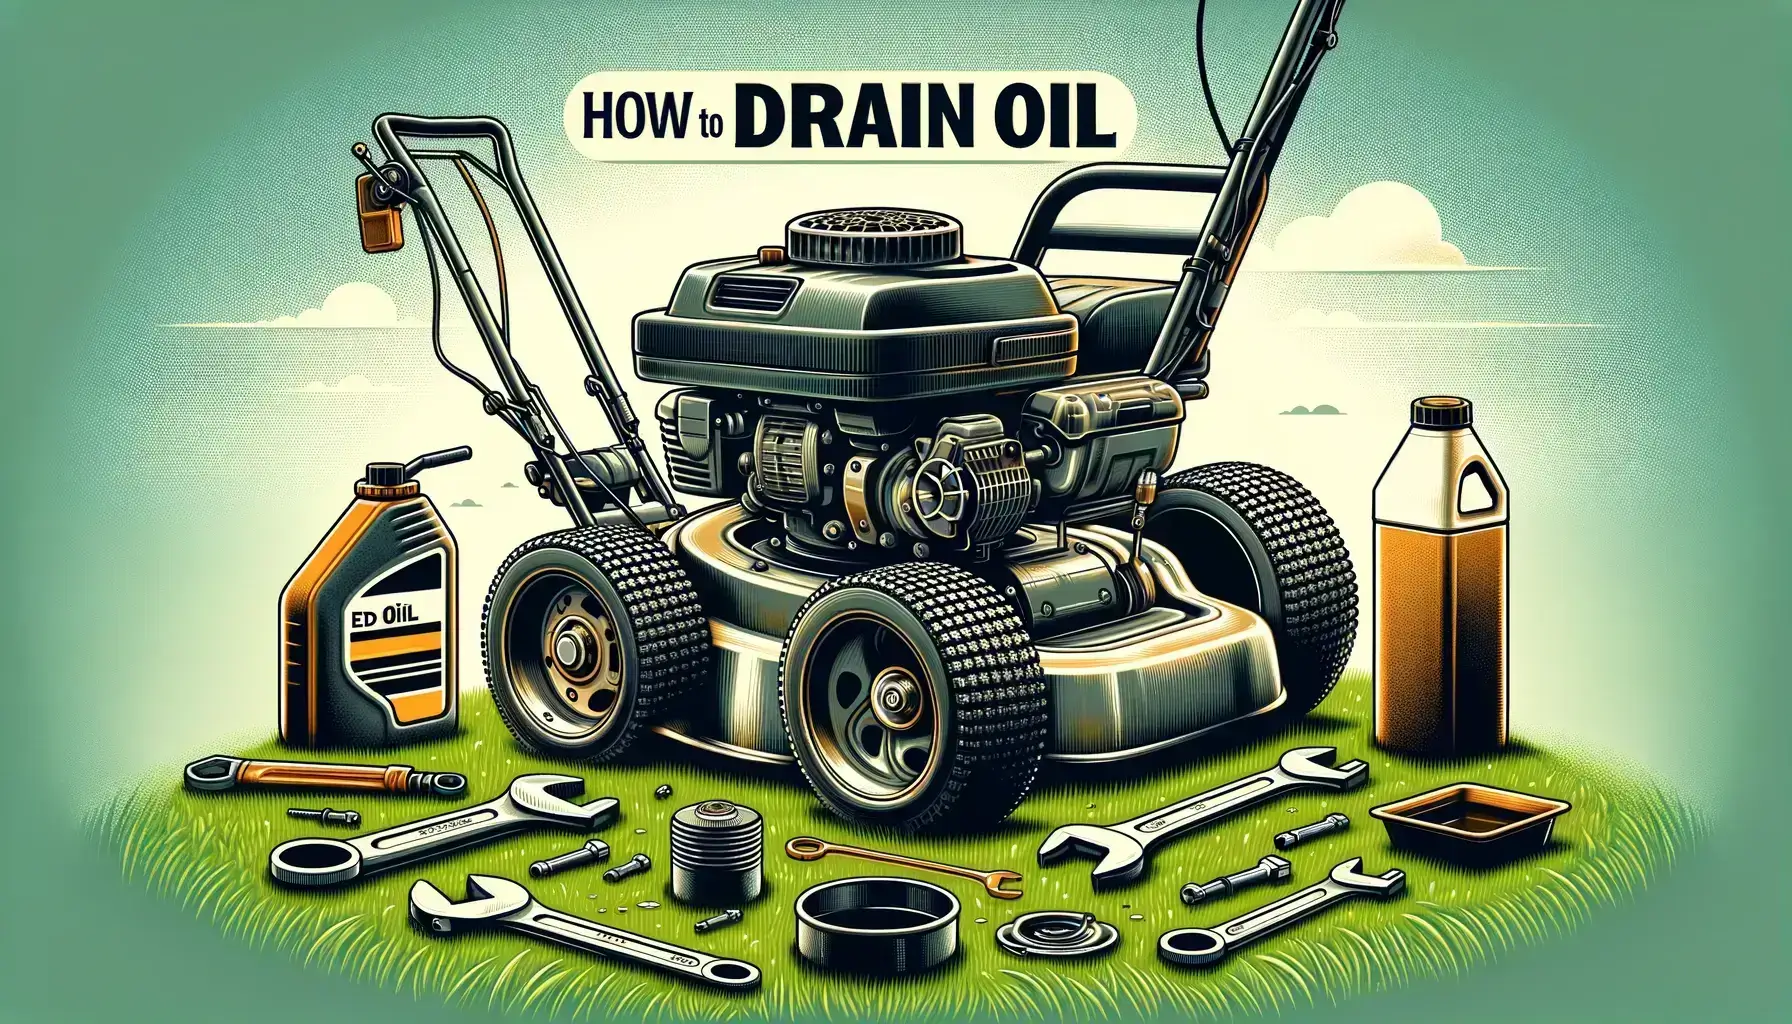 How To Drain Oil From Riding Lawn Mowers